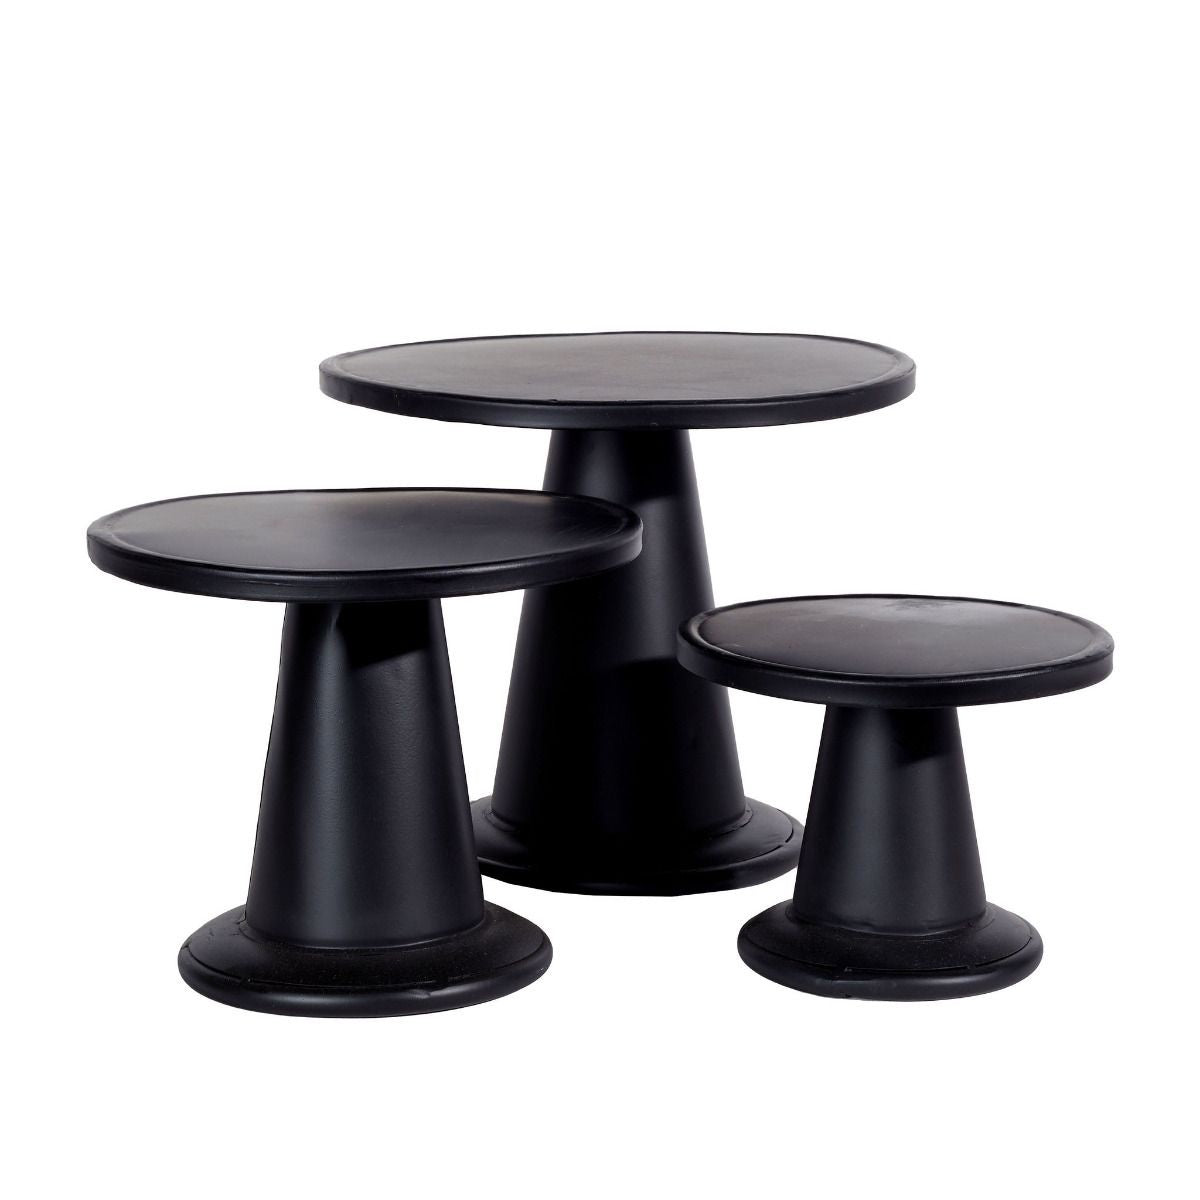 Picardy Cake Stand - Med